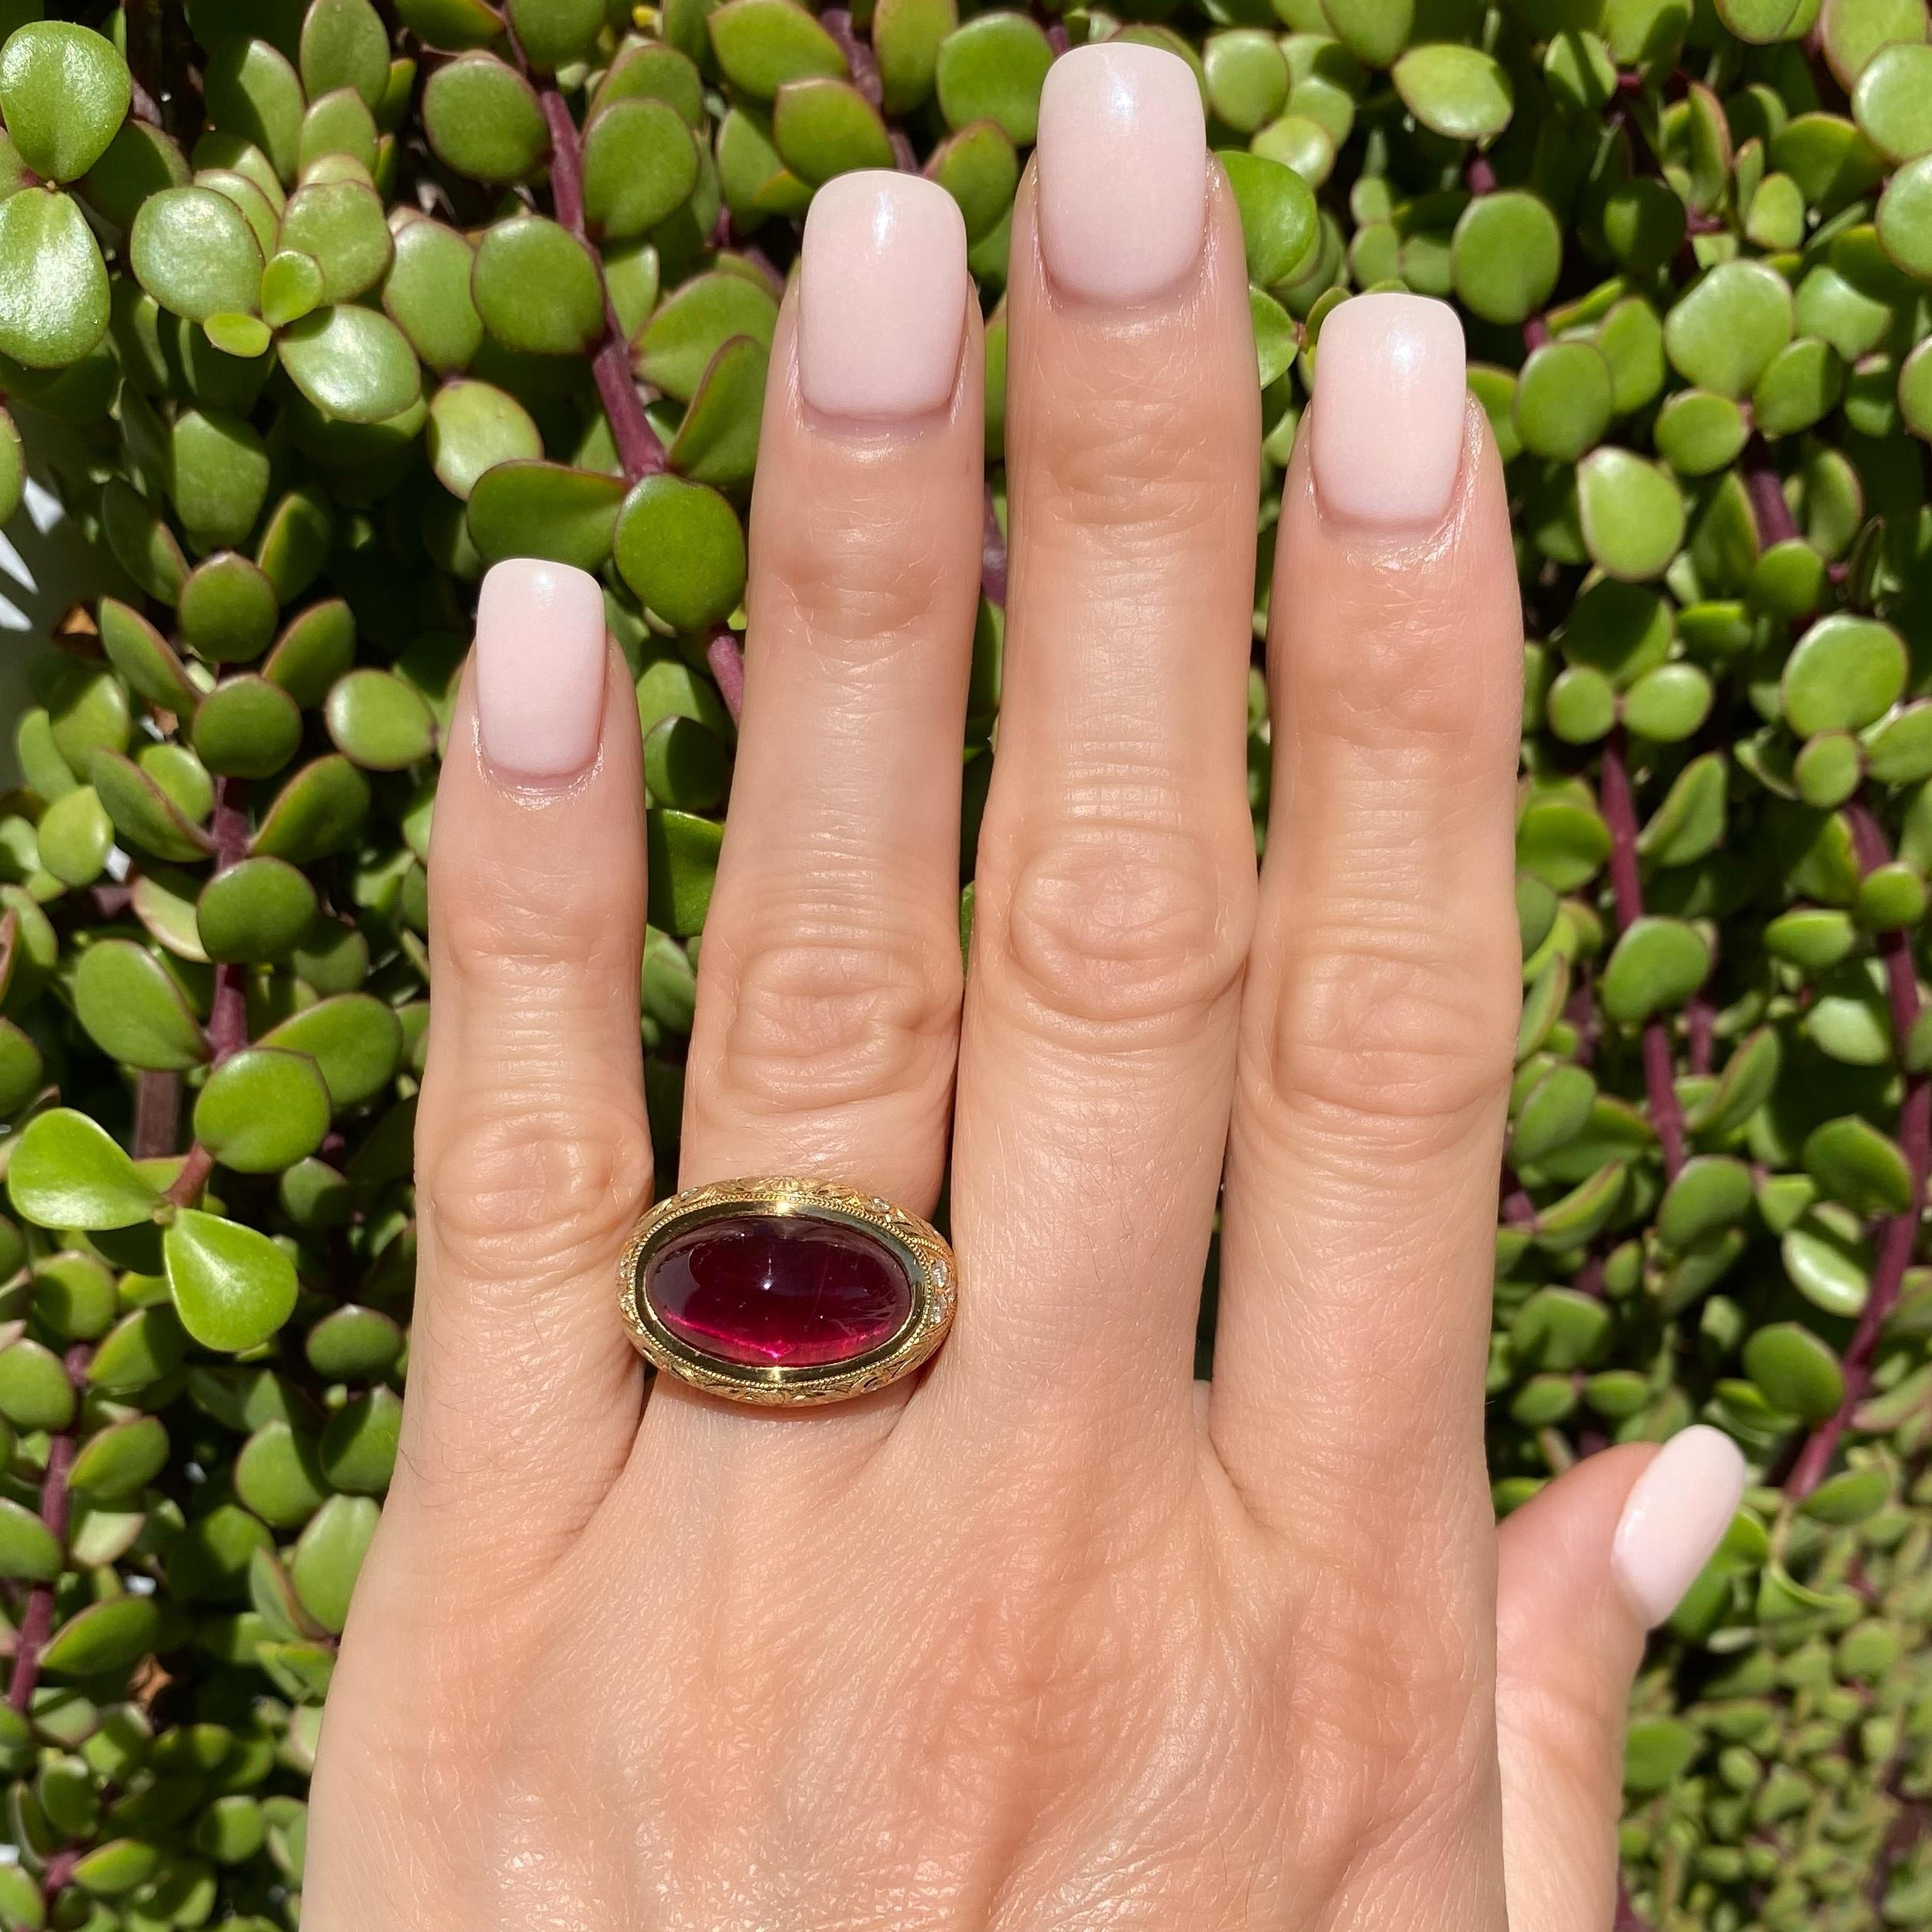 Awesome Sugarloaf Rubelite Tourmaline and Diamond Ring. Center securely nestled and Hand set with an oval 9.39 Carat Sugarloaf Rubelite Tourmaline, accented by Diamonds, approx. 0.25tcw. Beautifully Hand engraved and Hand crafted 18K Yellow Gold